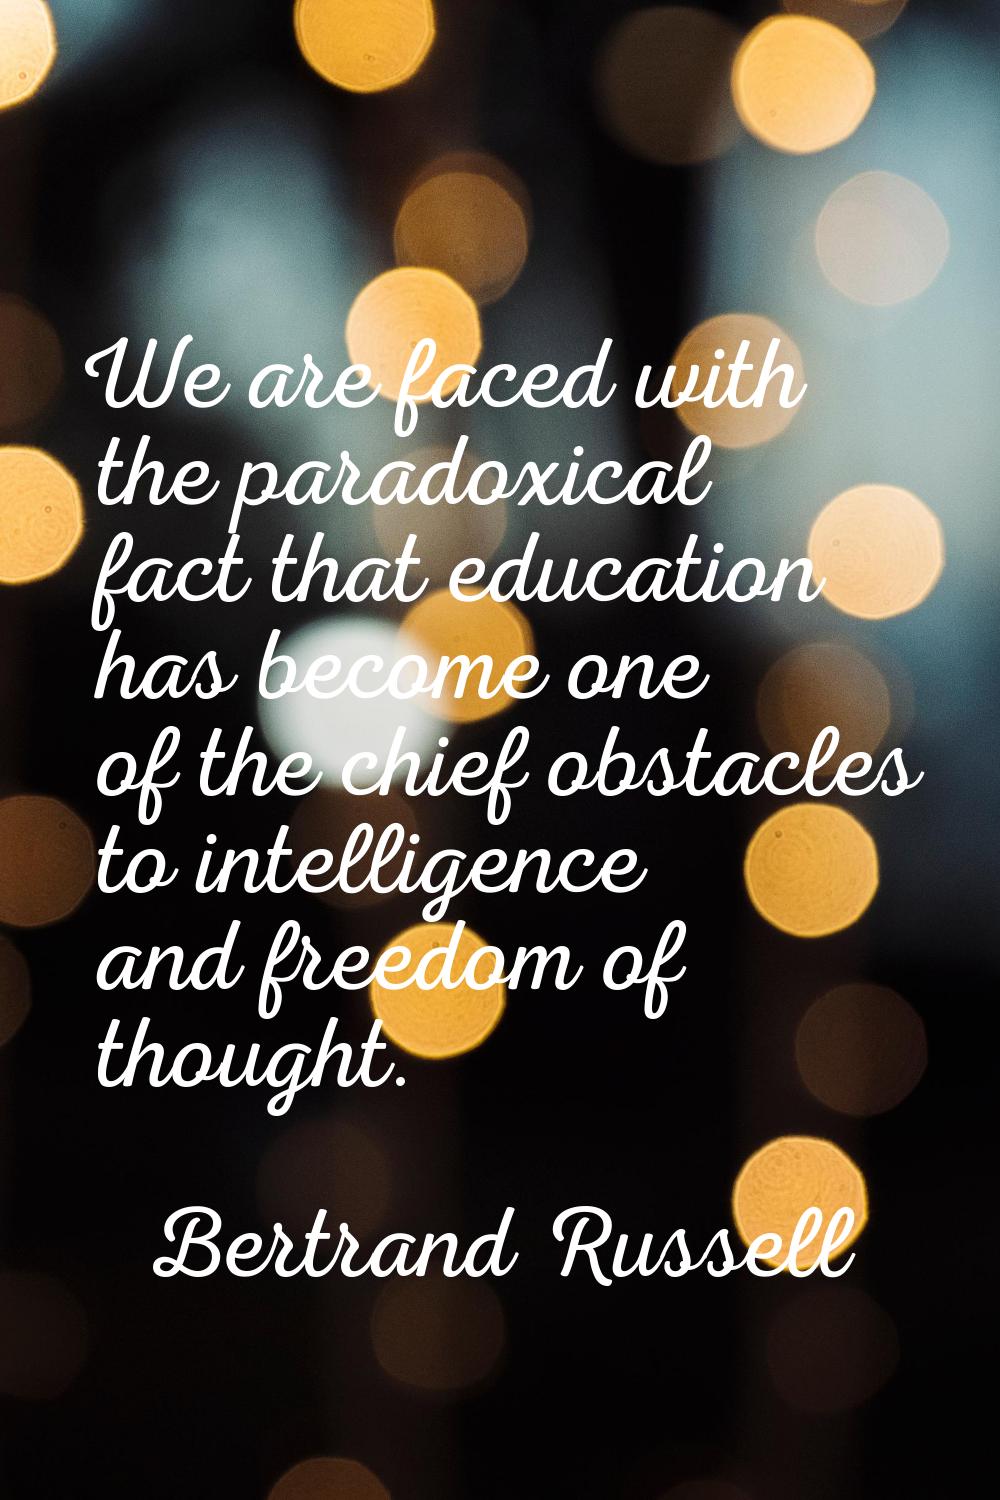 We are faced with the paradoxical fact that education has become one of the chief obstacles to inte